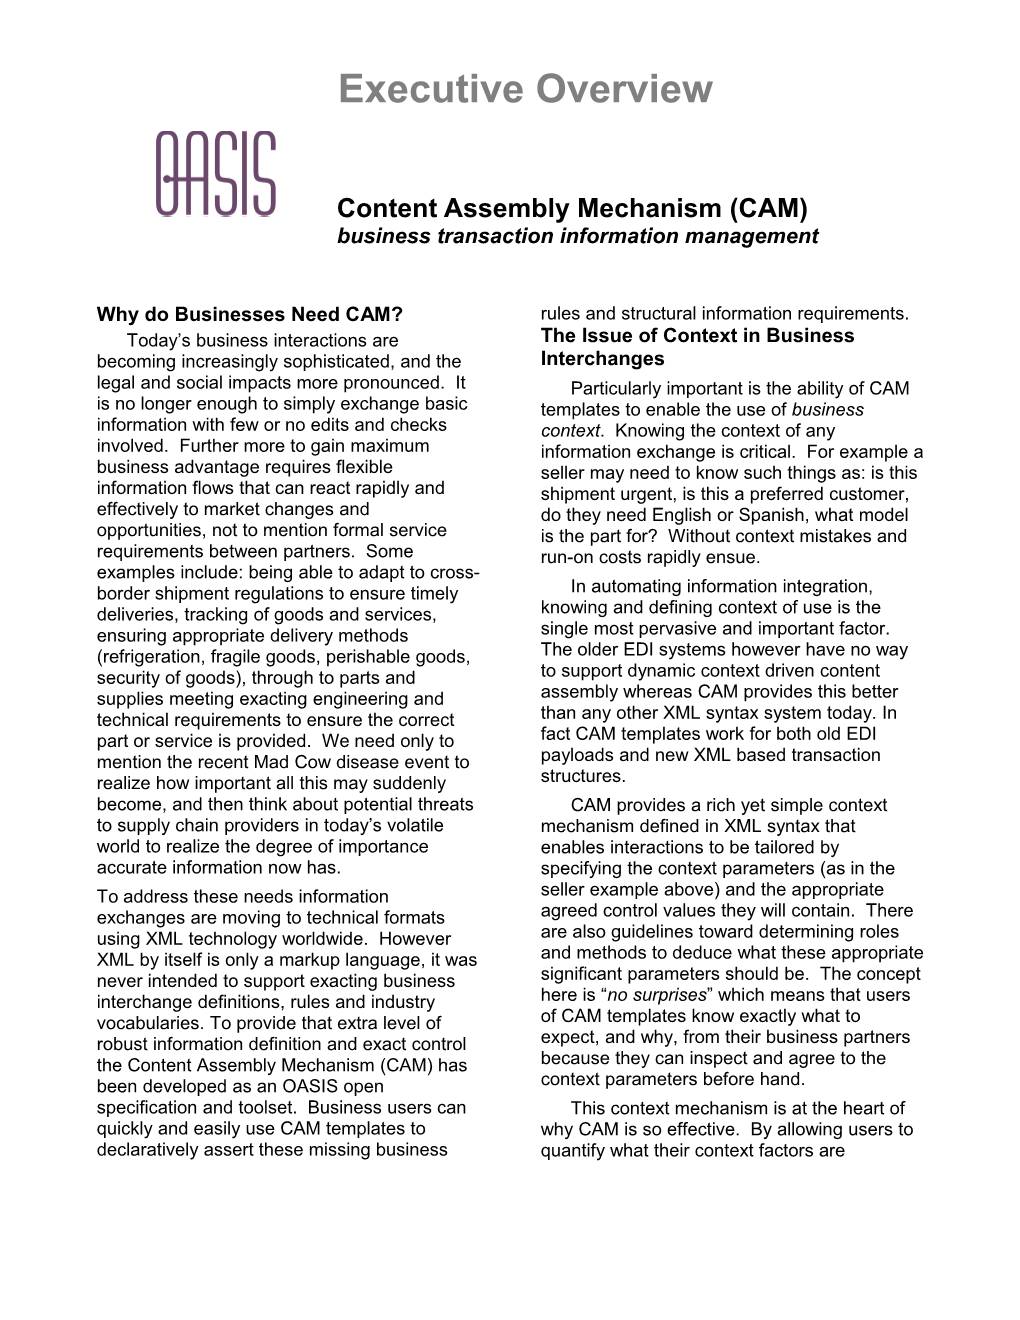 CAM Business Overview Brochure